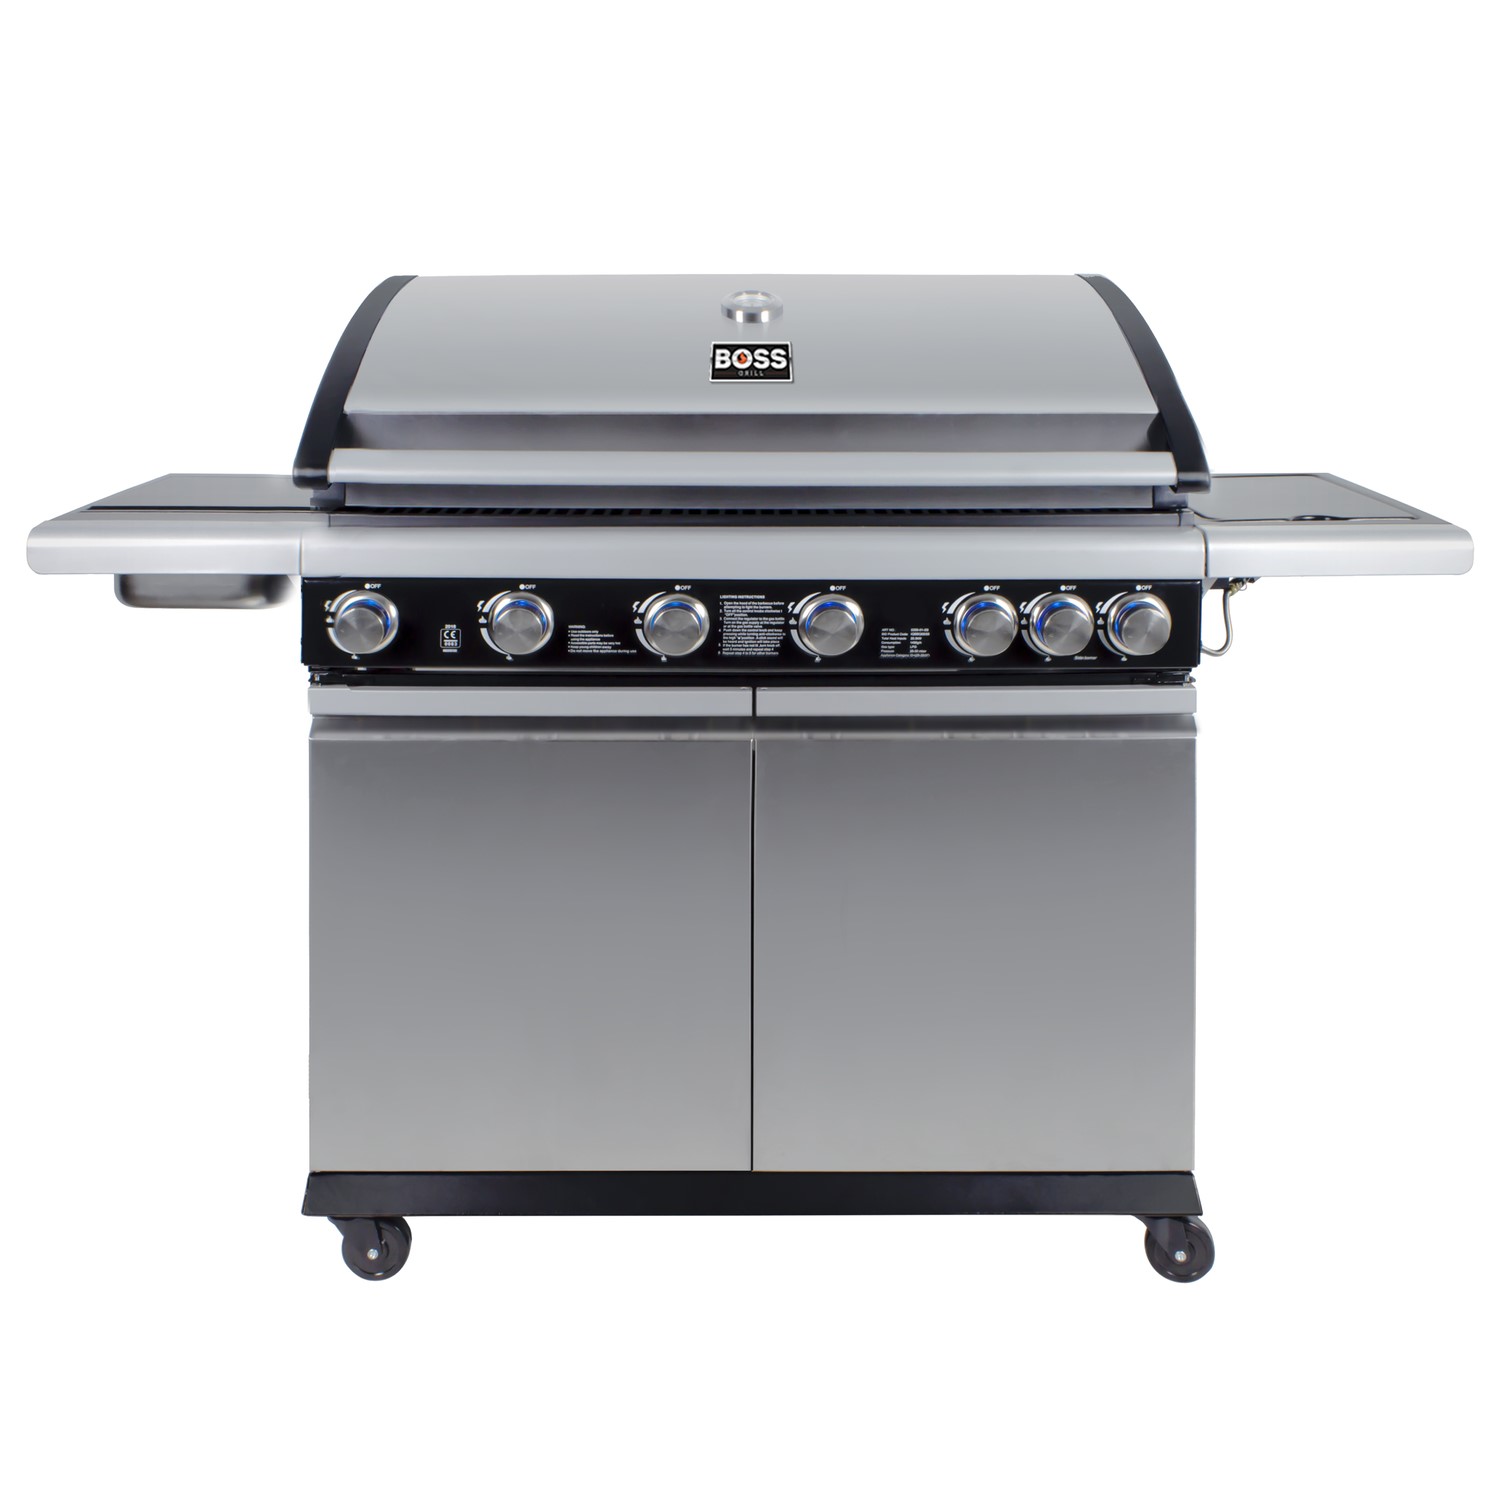 Refurbished Boss Grill Alabama Elite IQBBQ6BSS 6 Burner Gas BBQ with Side Burner Stainless Steel